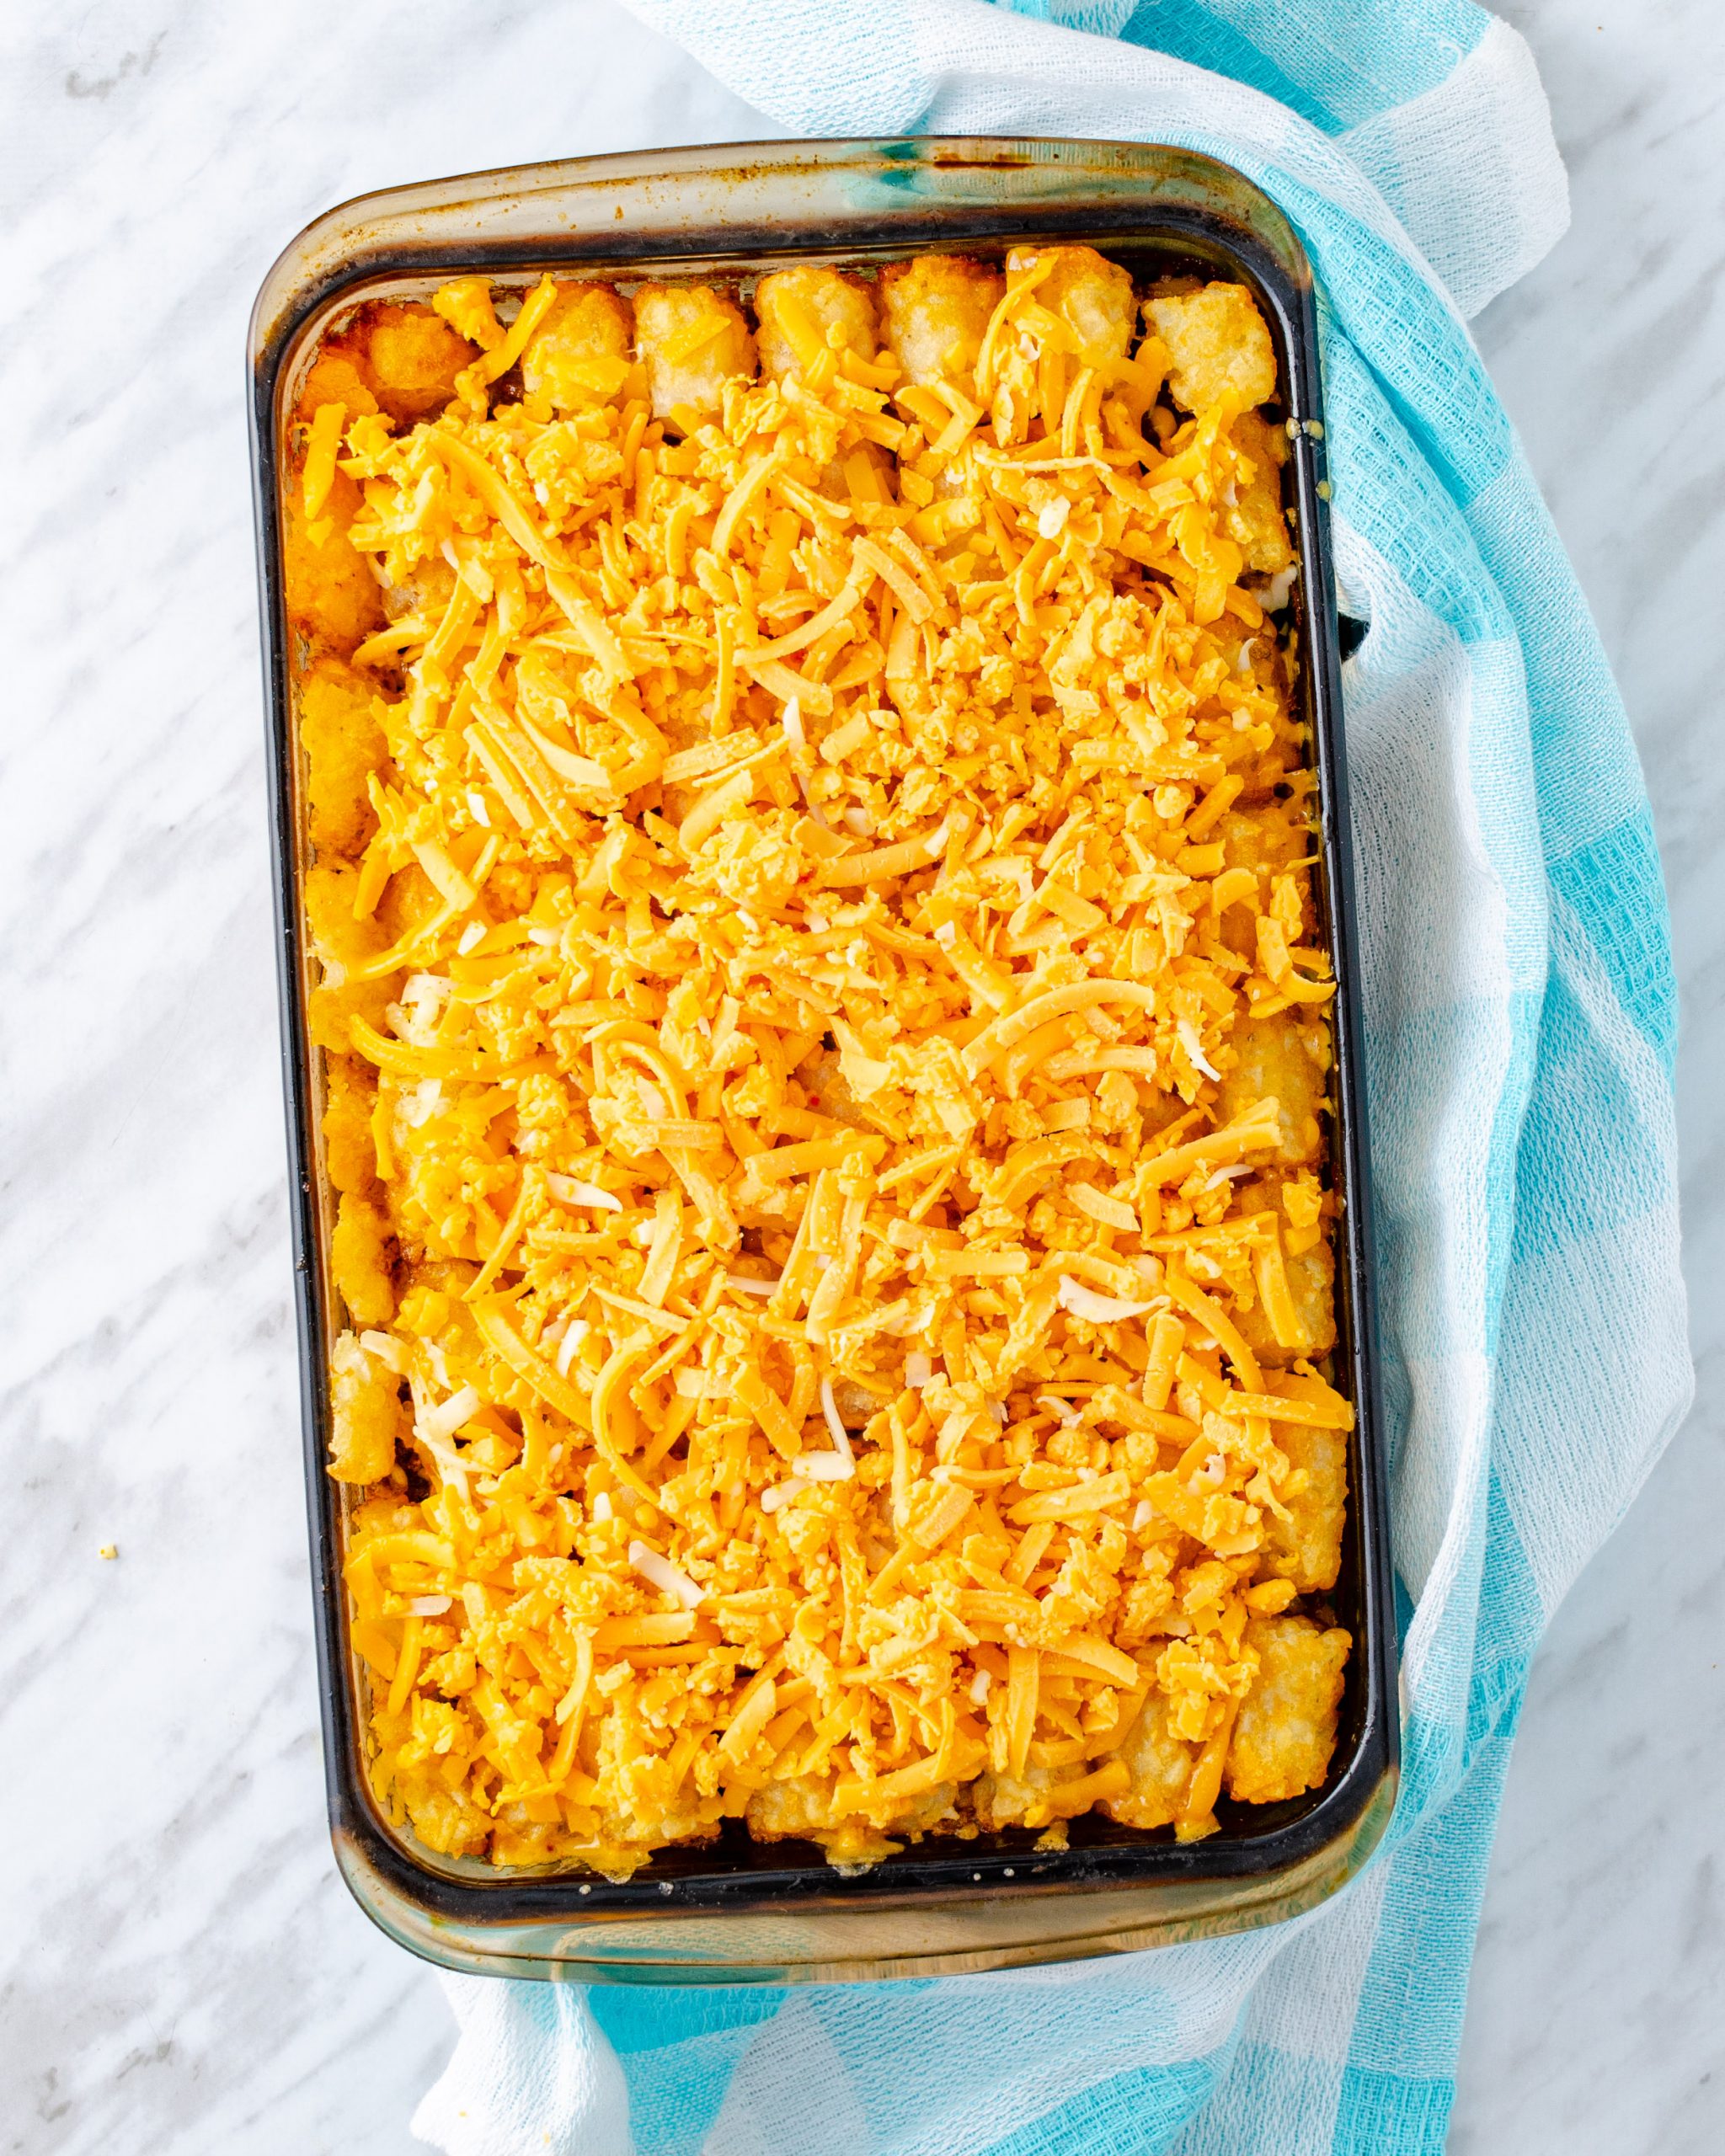 Remove from the oven, top with the shredded cheese